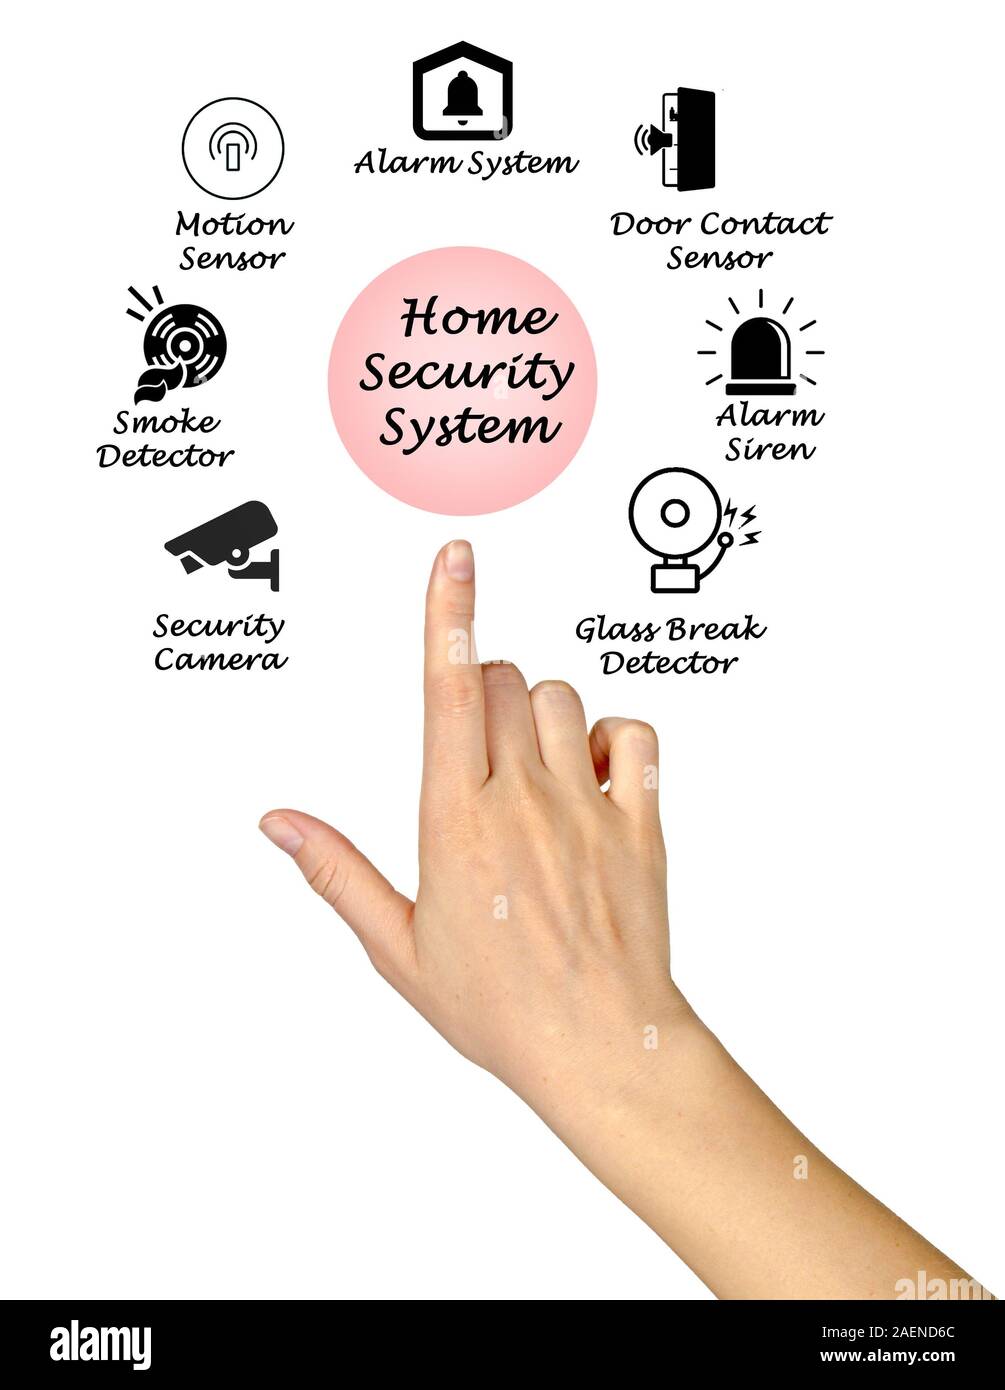 Home Security System Stock Photo